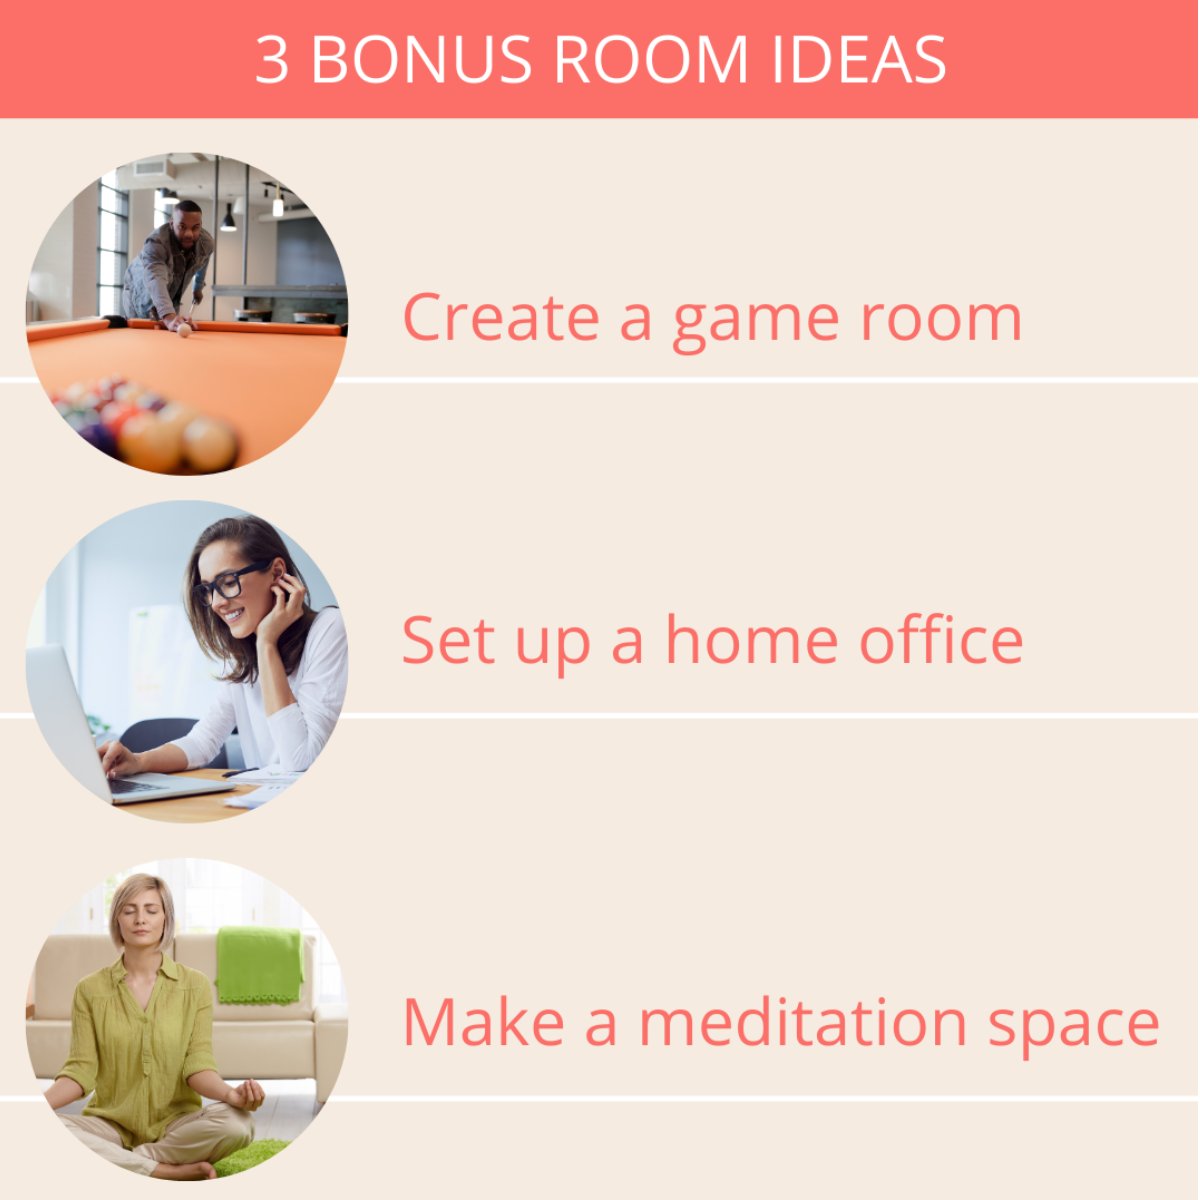 Not sure what to do with that extra room? Check out these bonus rooms ideas: 1. Create a game room. 2. Set up a home office. 3. Make a meditation space. How would you use a bonus room? Tell us in the comments! 💭 #bonusroom #decor #decorating #interiordesign